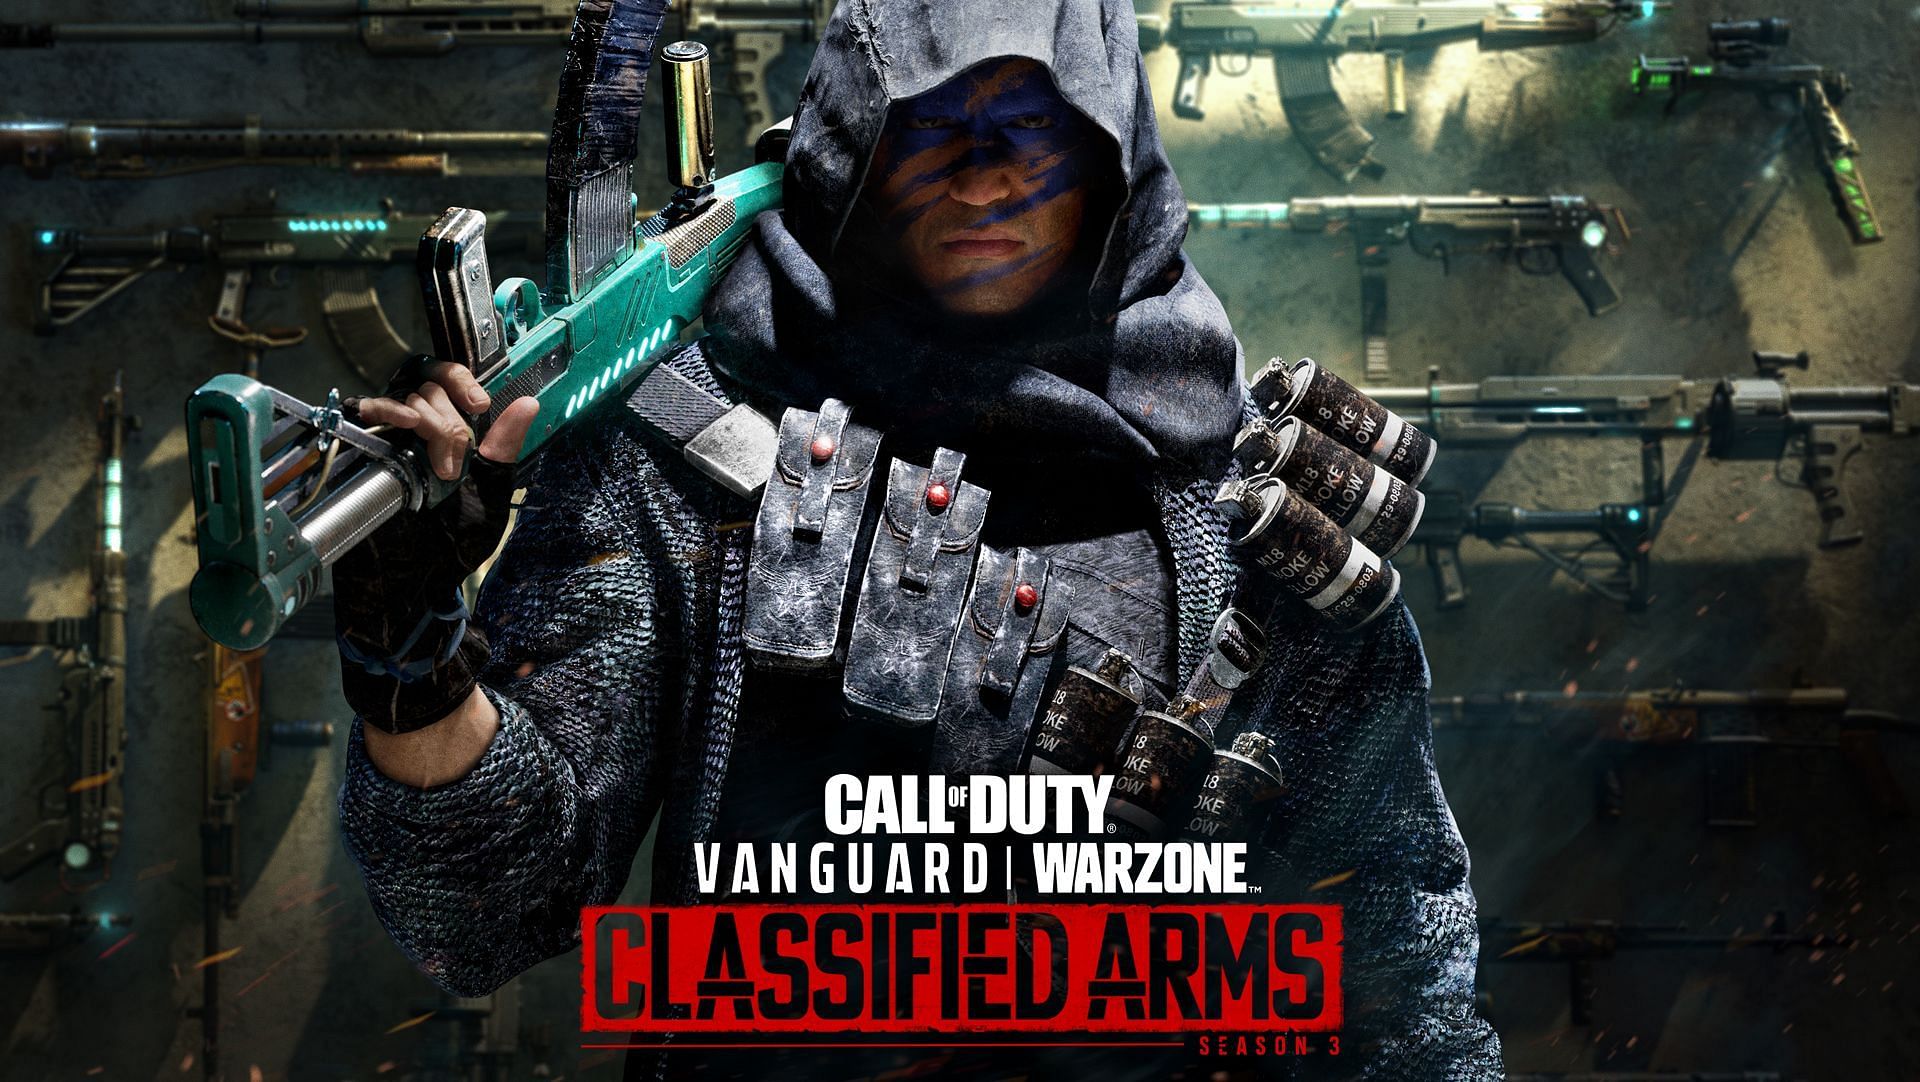 Call of Duty Warzone and Vanguard Season 3 Classified Arms (Image by Activision)